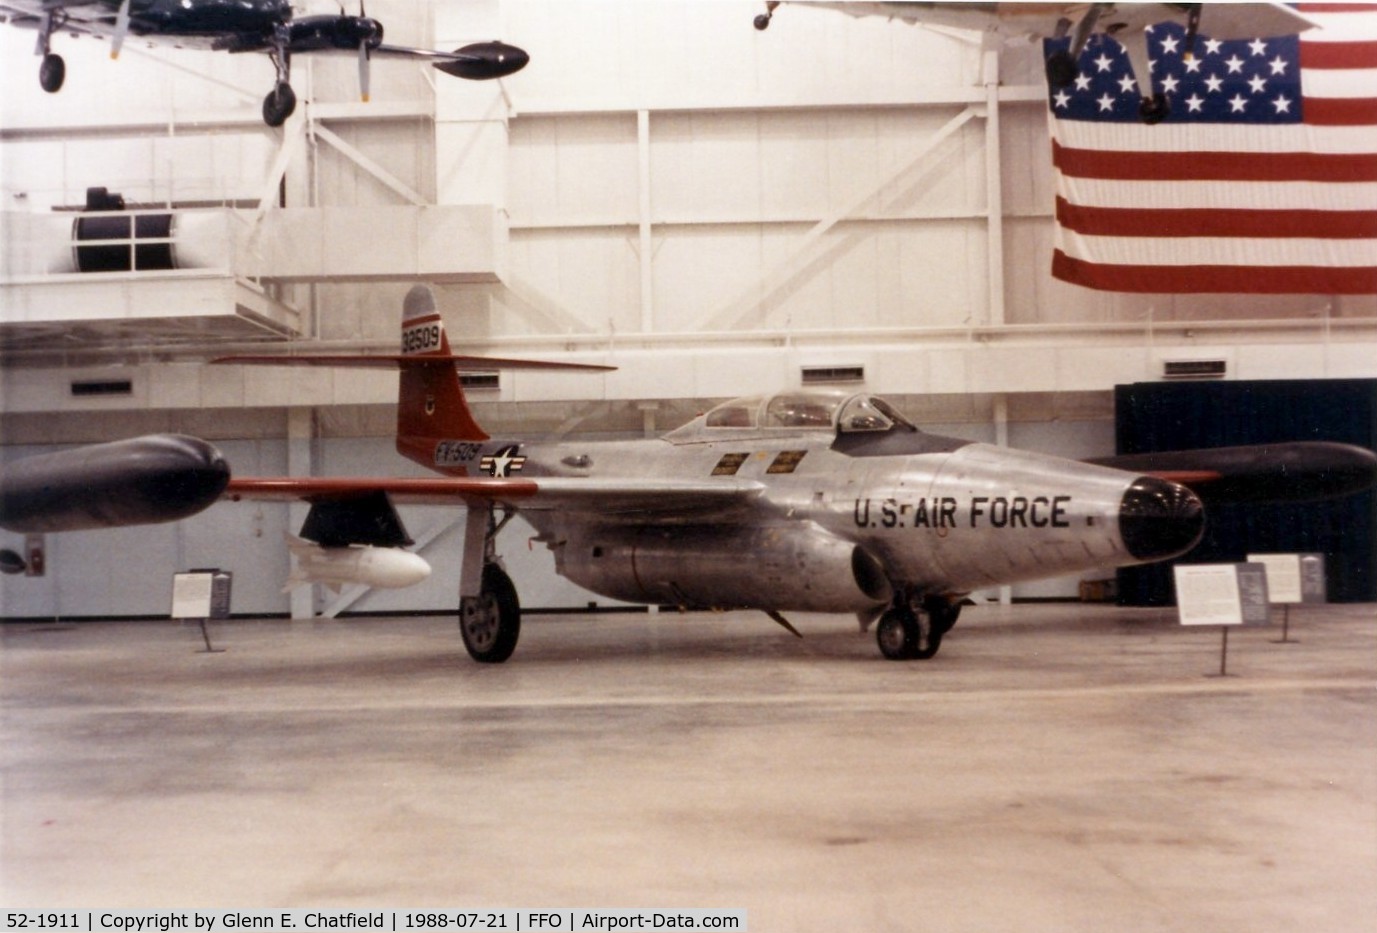 52-1911, 1952 Northrop F-89D Scorpion C/N Not found 52-1911, F-89D at the National Museum of the U.S. Air Force